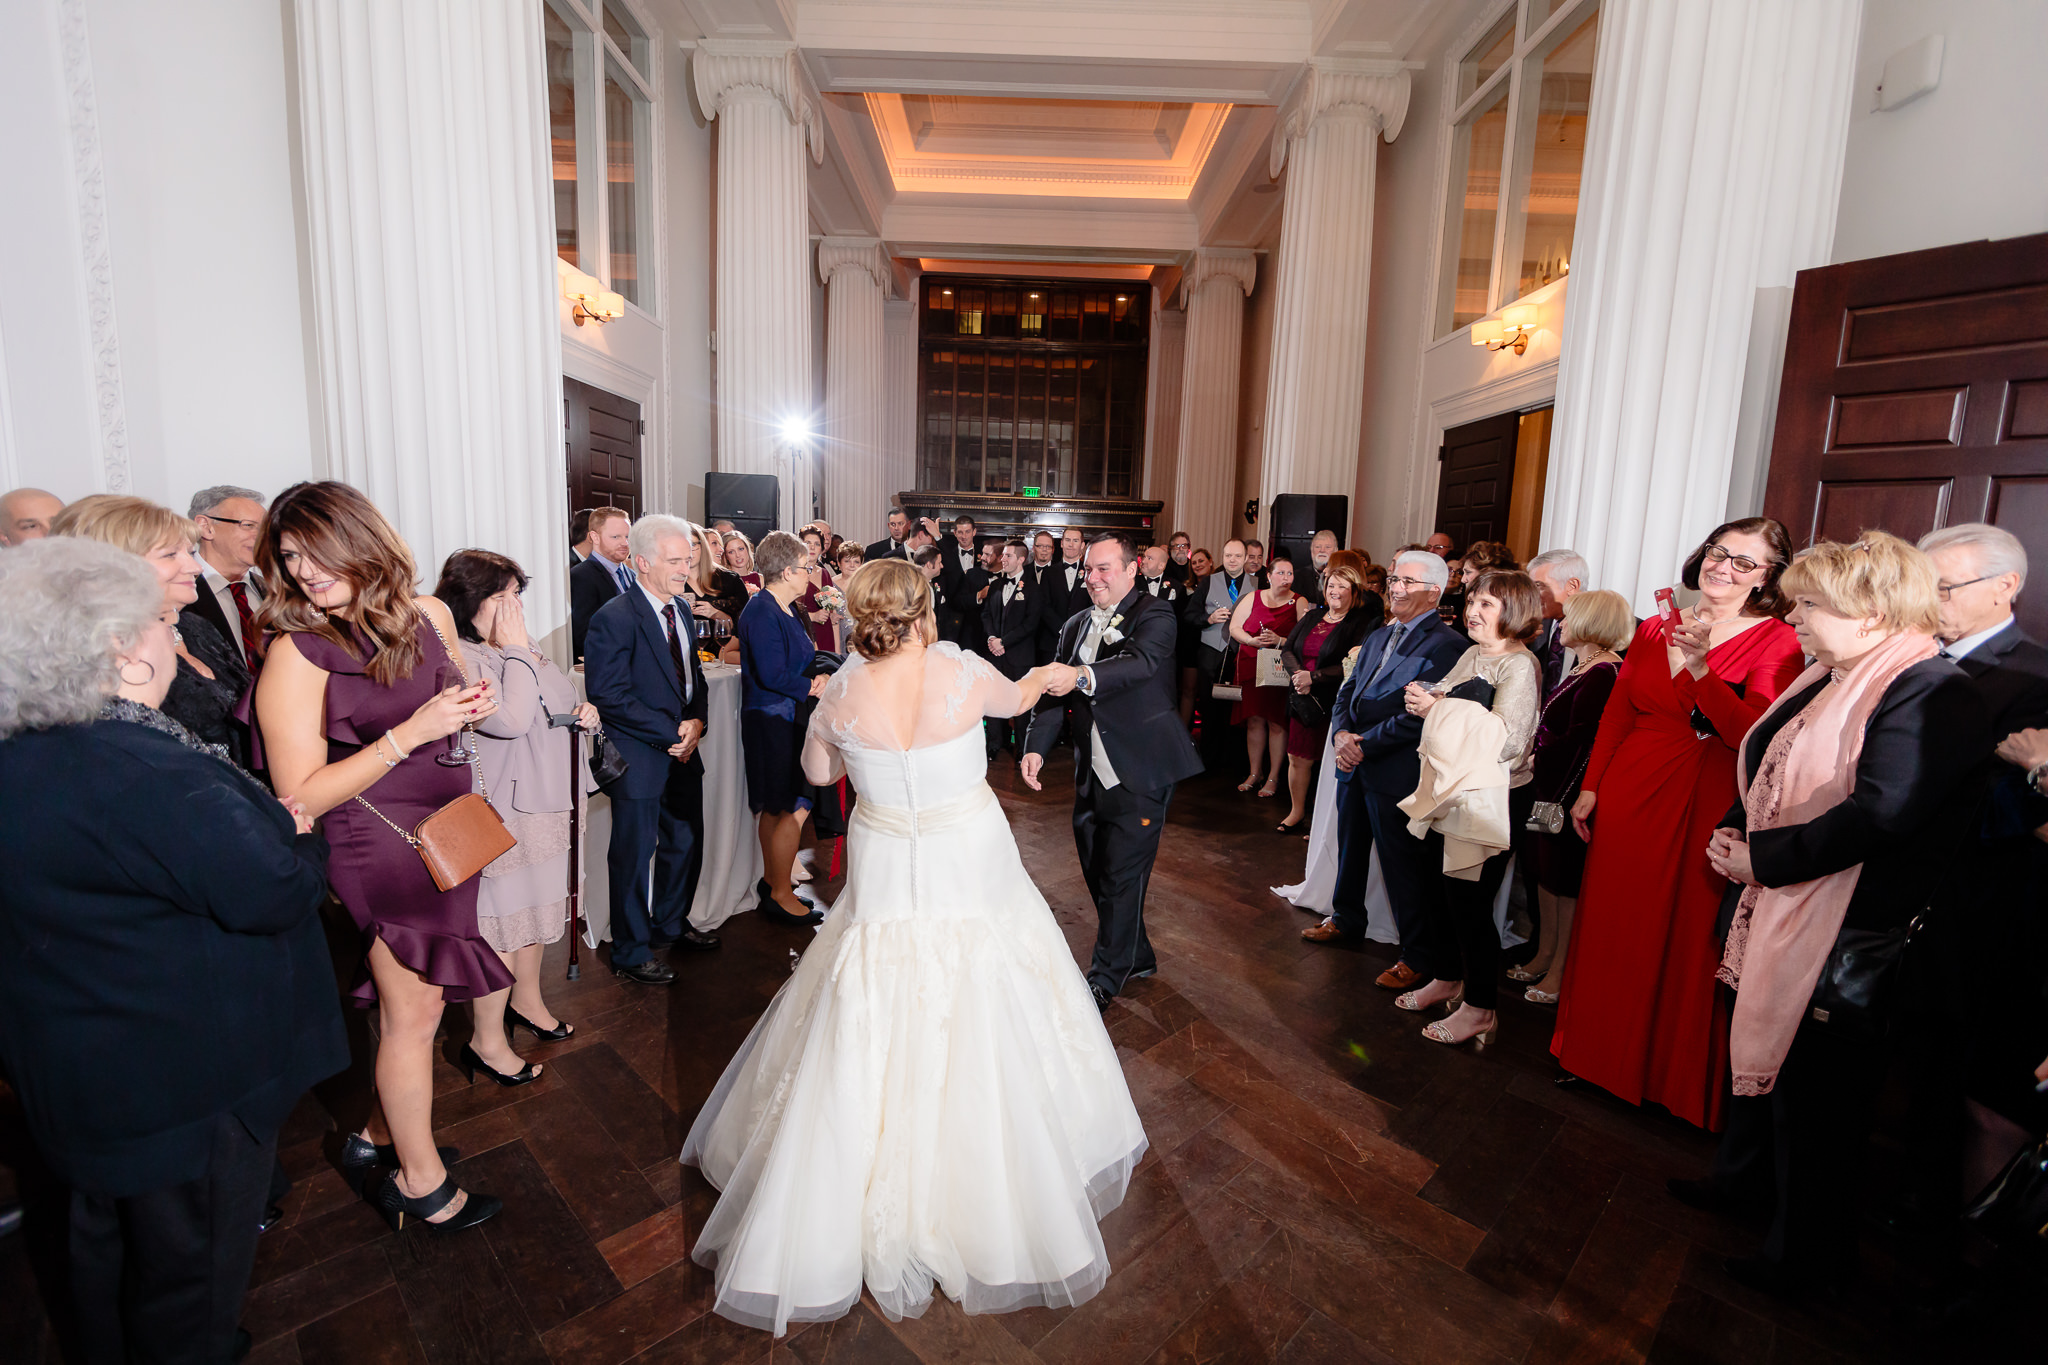 Guests line the dance floor during the first dance at Hotel Monaco